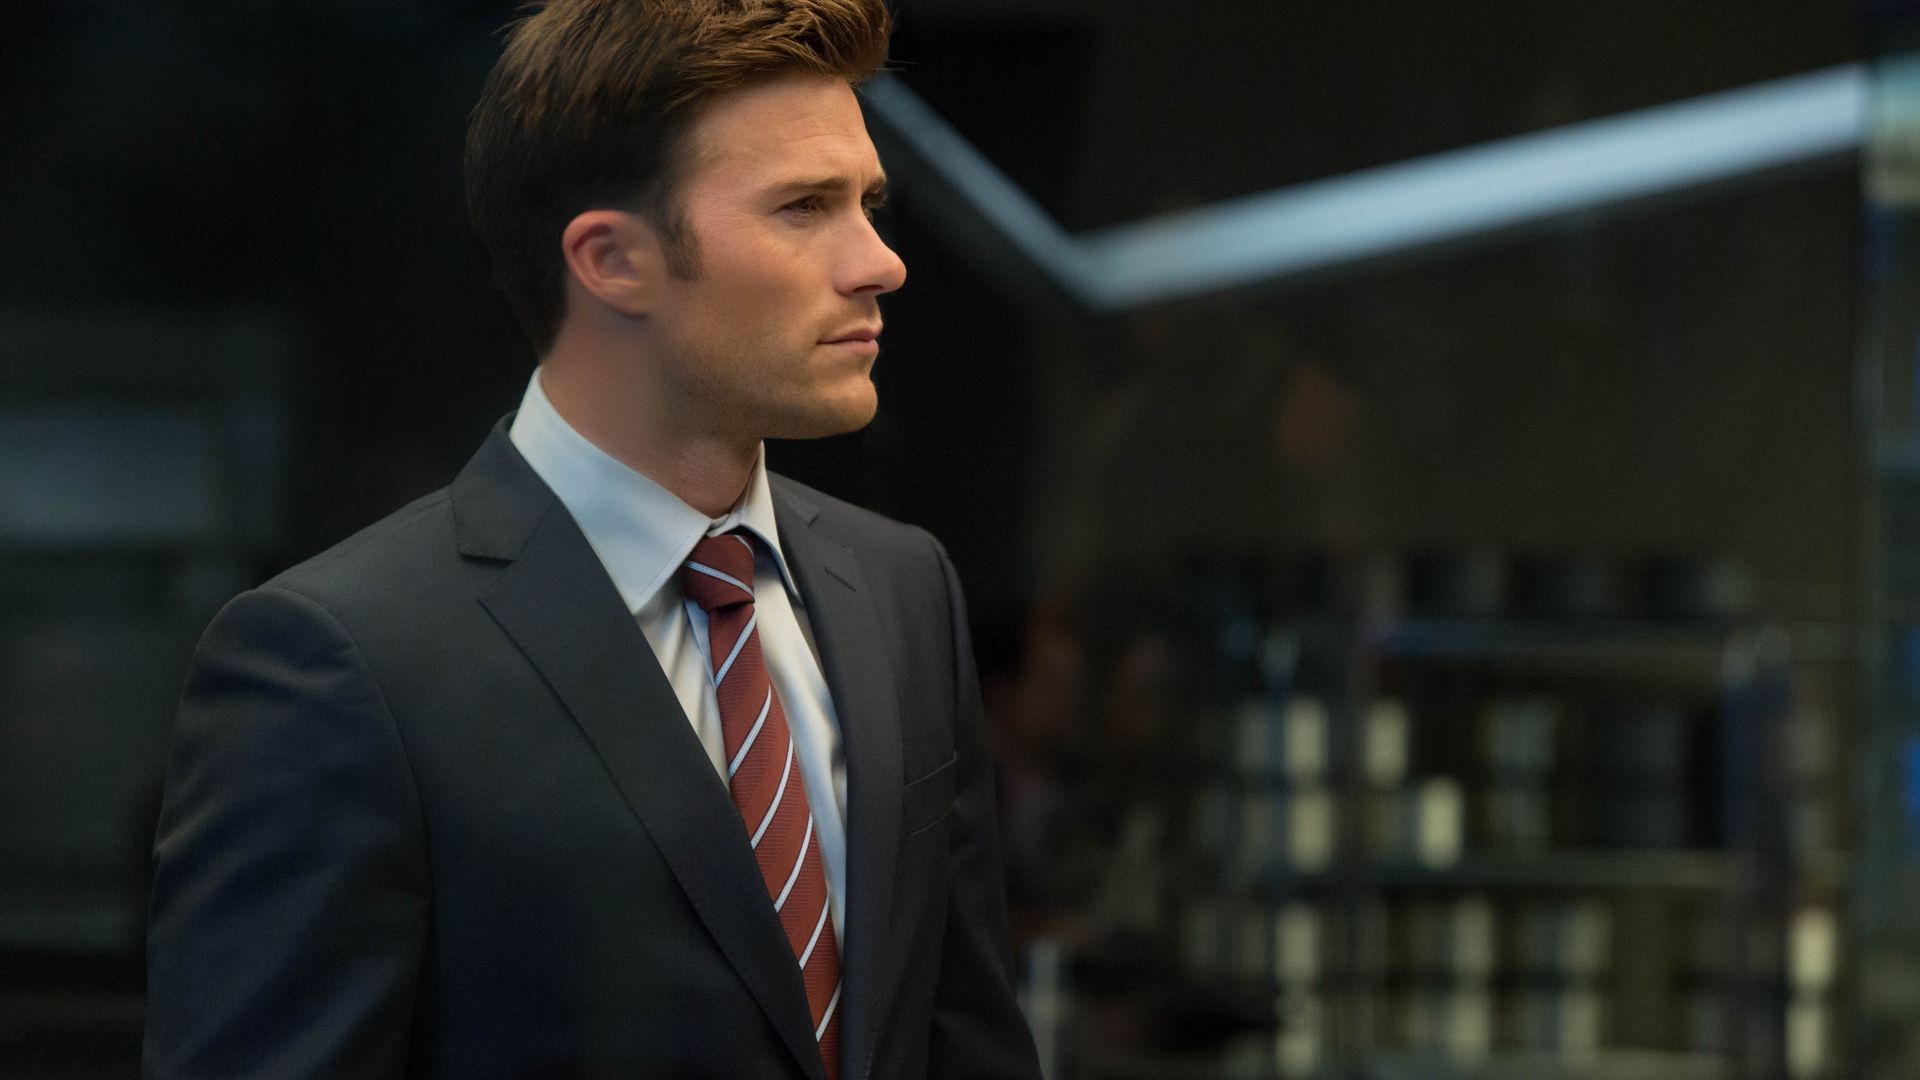 Wallpaper Scott Eastwood, The Fate of the Furious, actor in suit